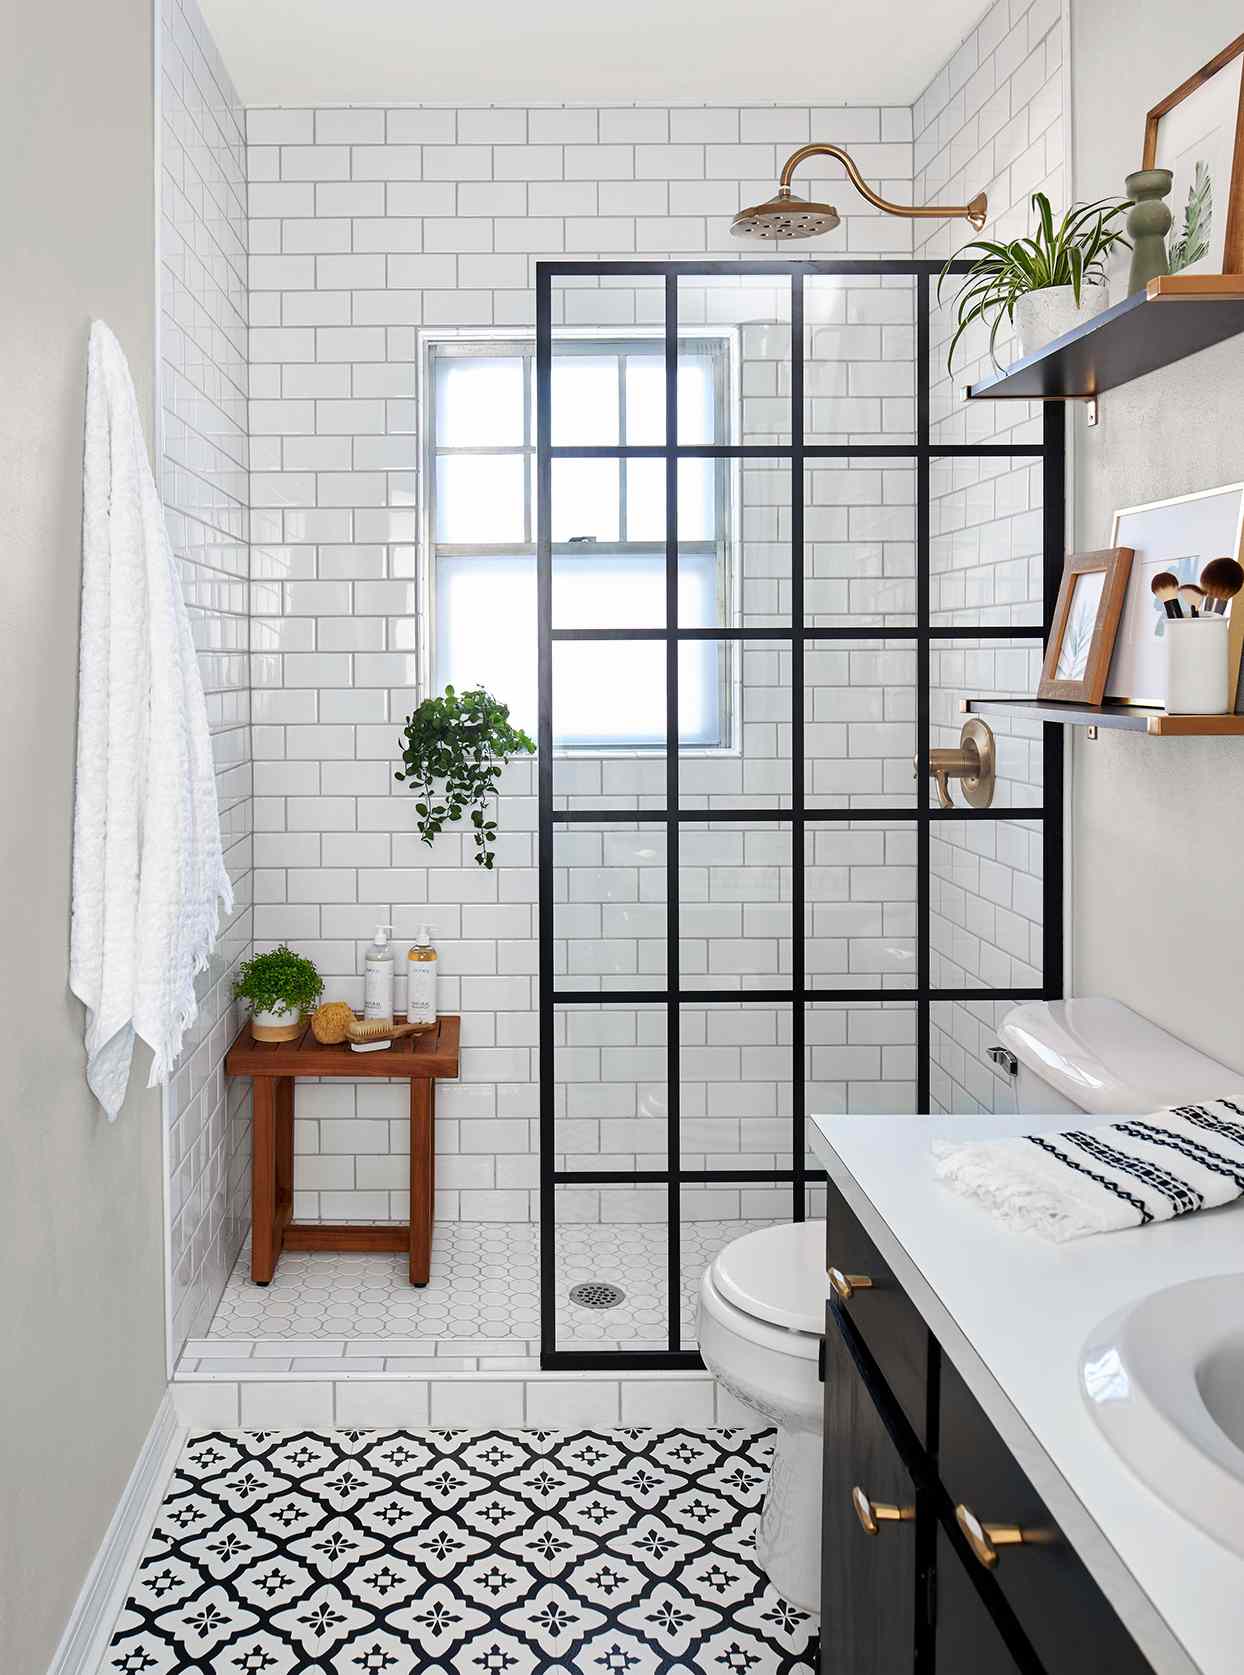 Before And After Small Bathroom Remodels That Showcase Stylish Budget Friendly Ideas Better Homes Gardens - How To Update A Bathroom On Tight Budget